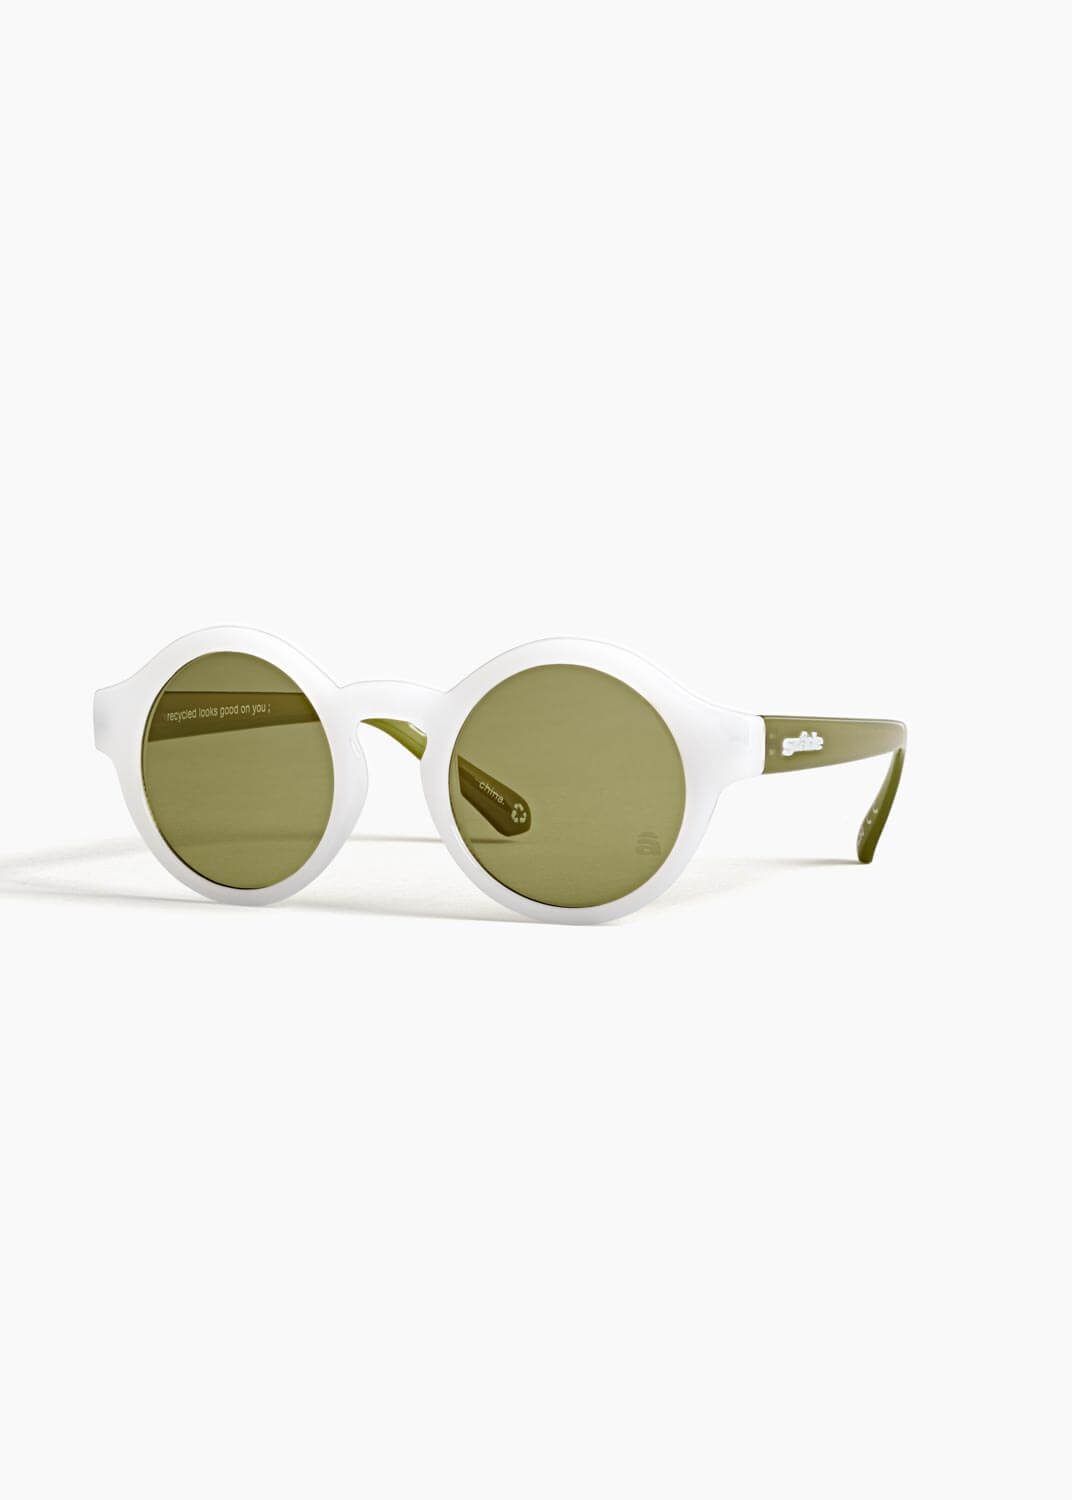 Szade RECYCLED SUNGLASSES  Szade - Lazenby in Bleach Wht/Char Olive/Caper